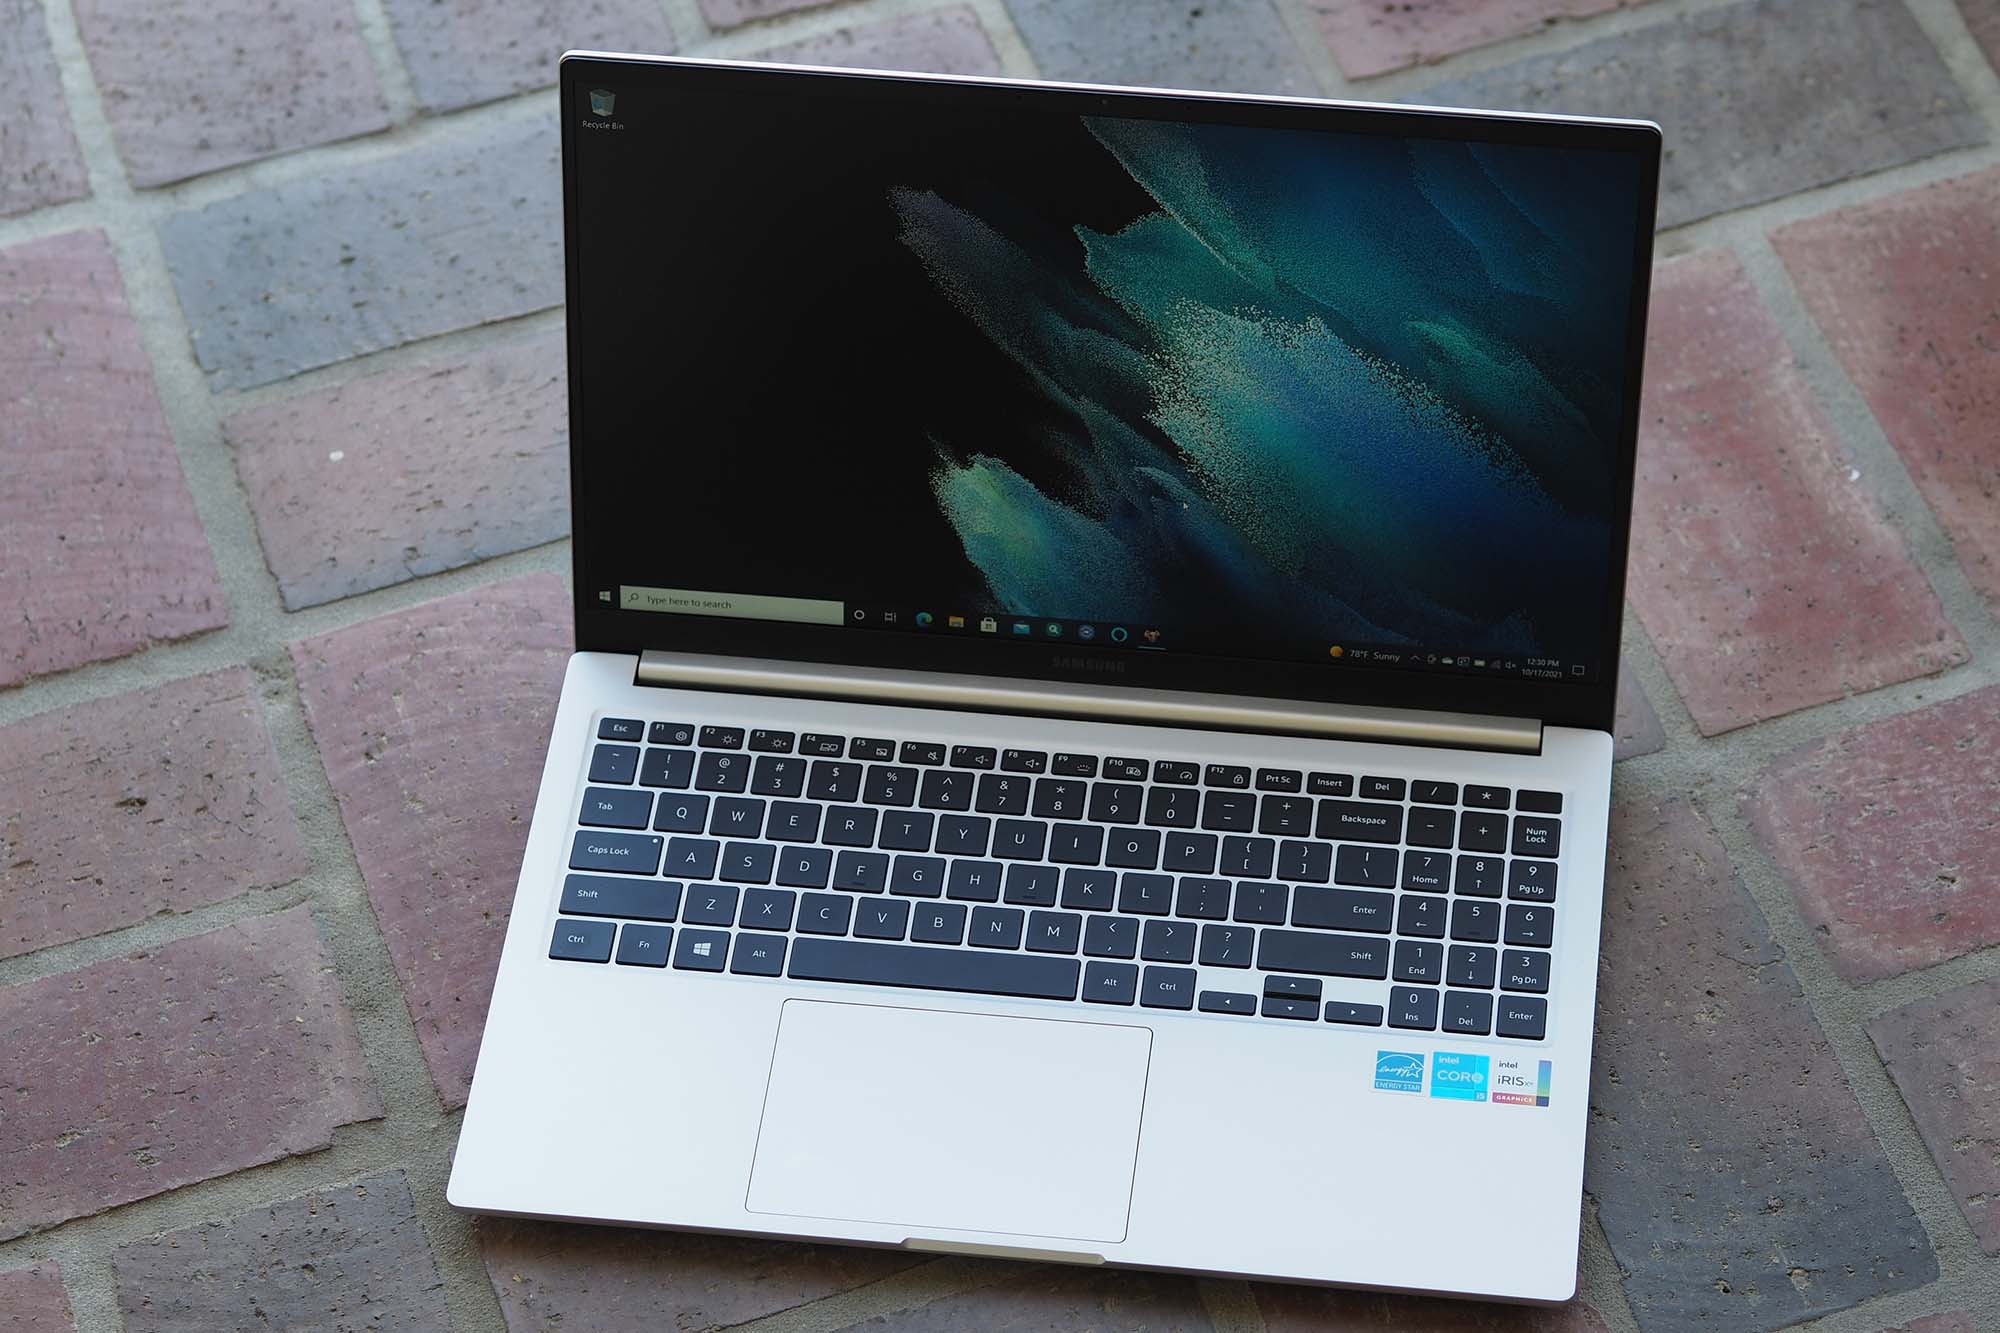 Samsung Galaxy Book Review: Too Many Compromises